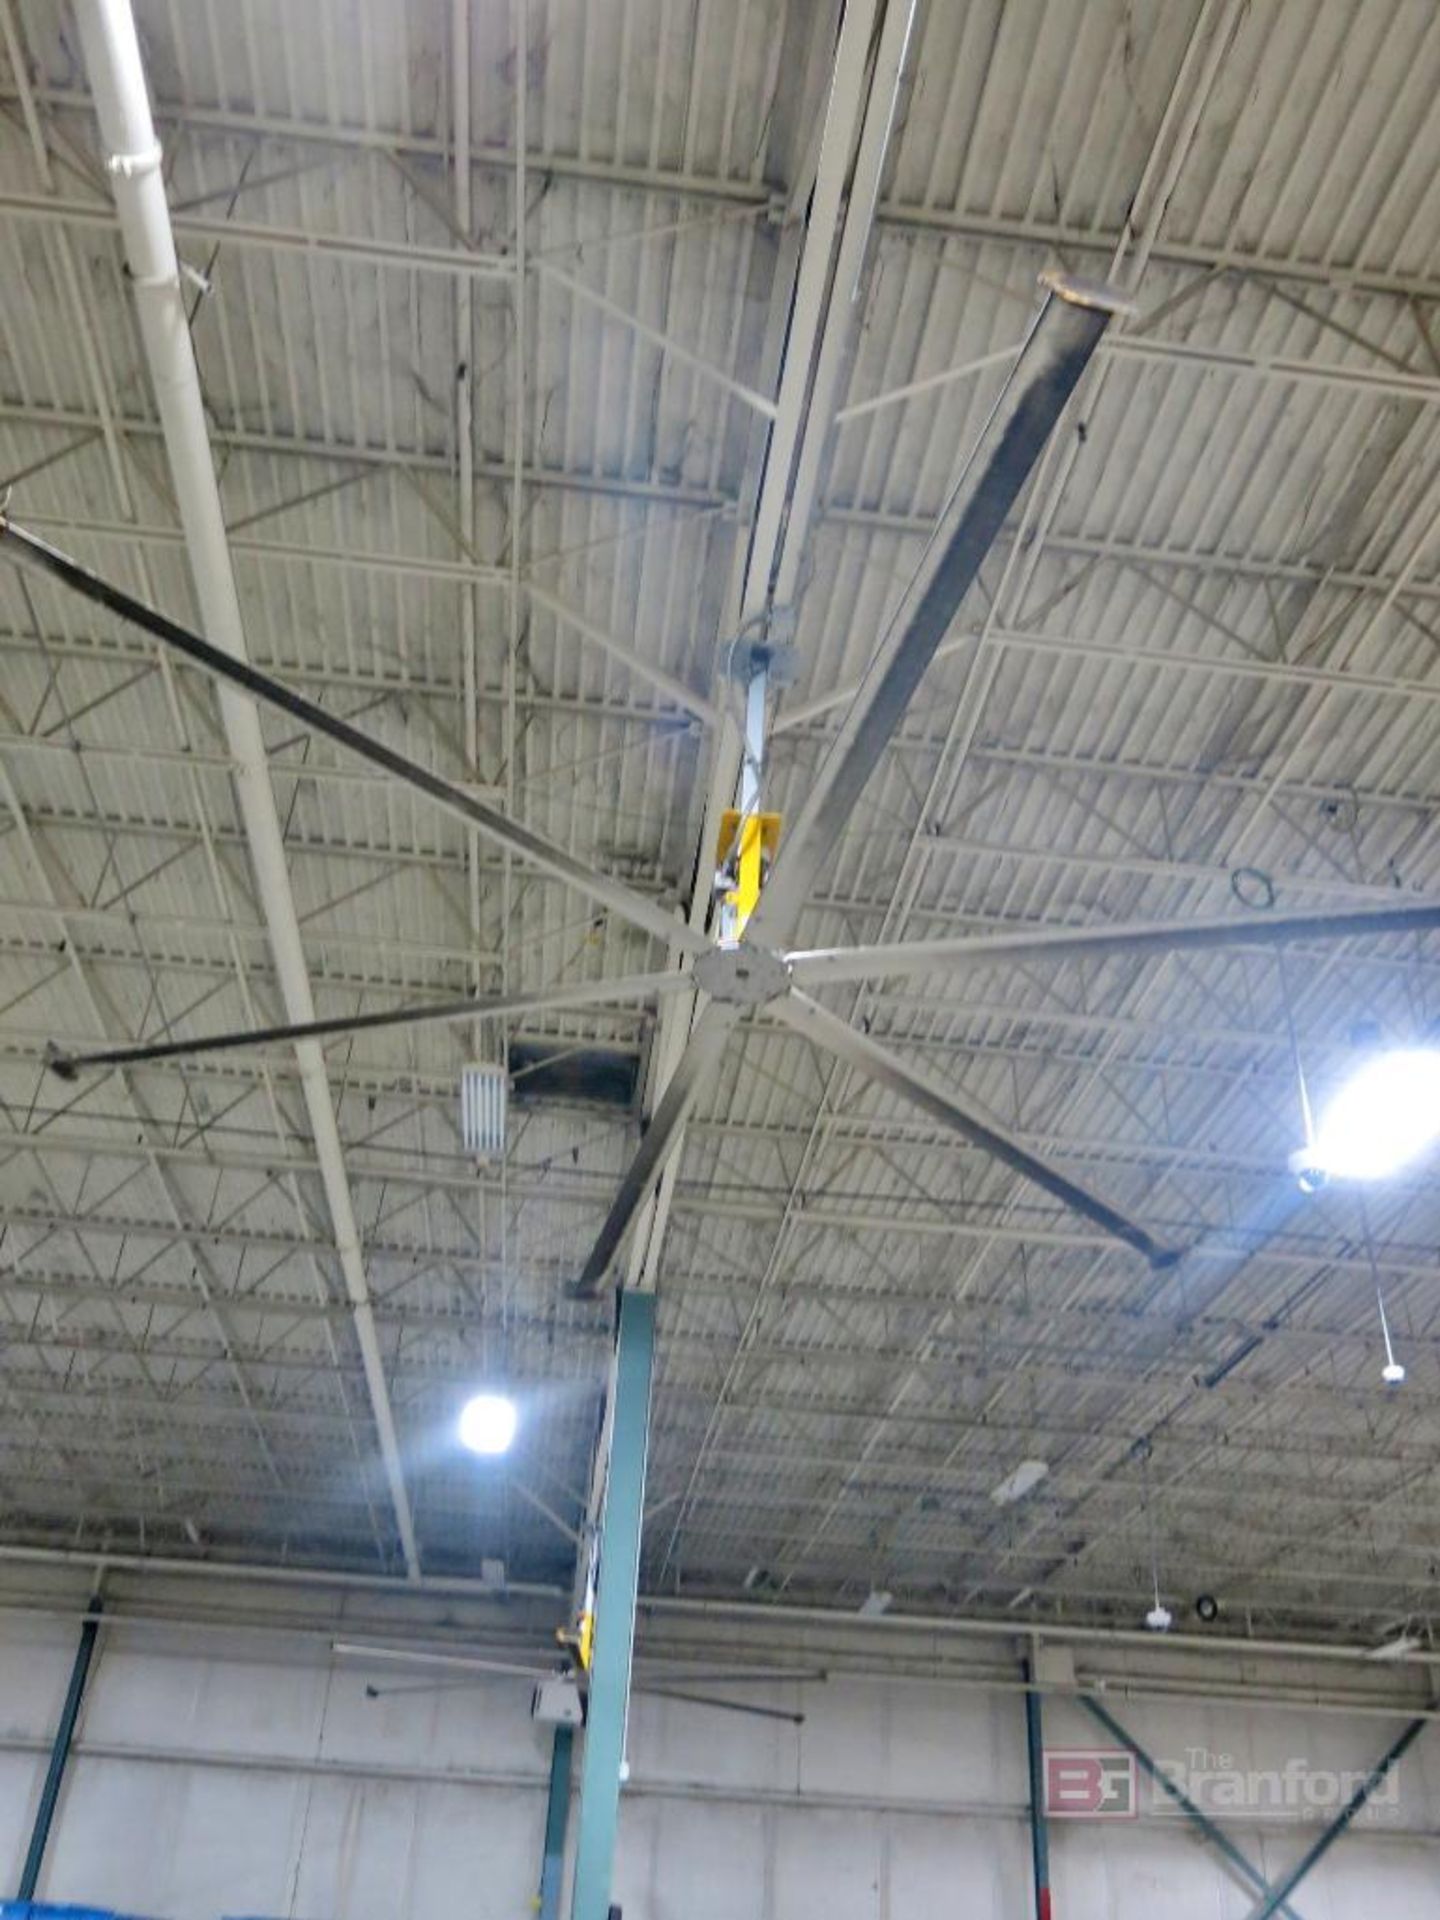 Lot of (2) Ceiling Mounted Big Ass Fans